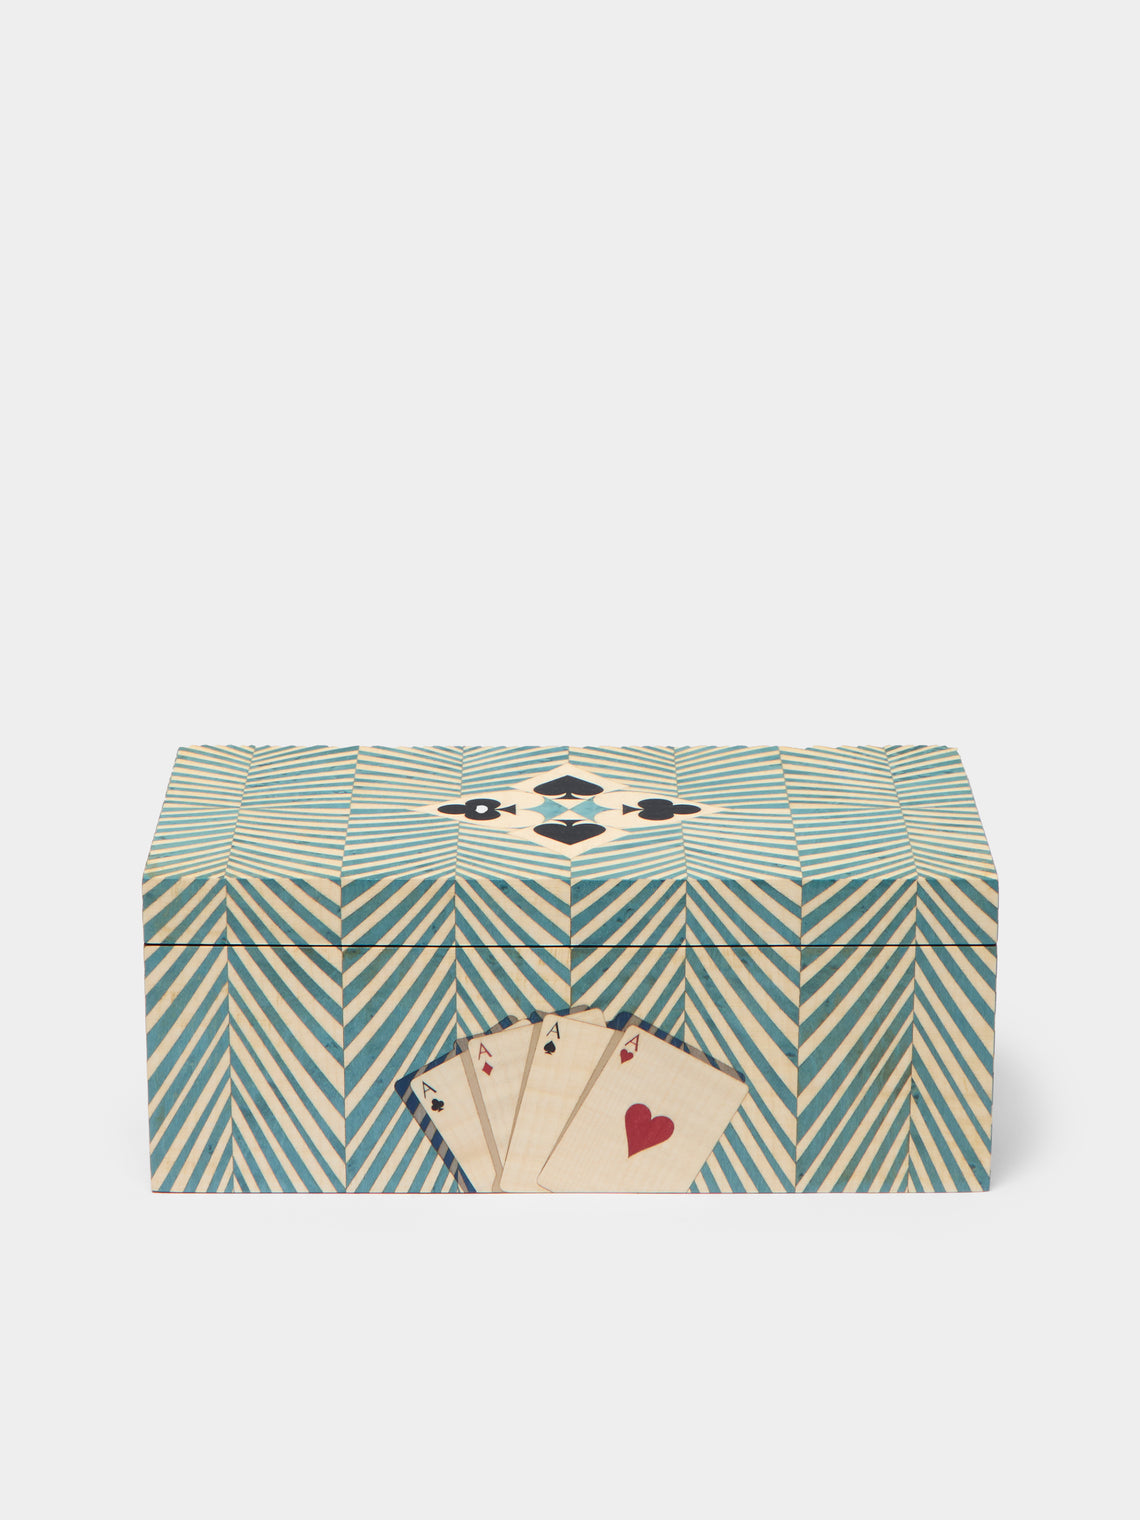 Alexandra Llewellyn - Turquoise Wood Playing Cards Box -  - ABASK - 